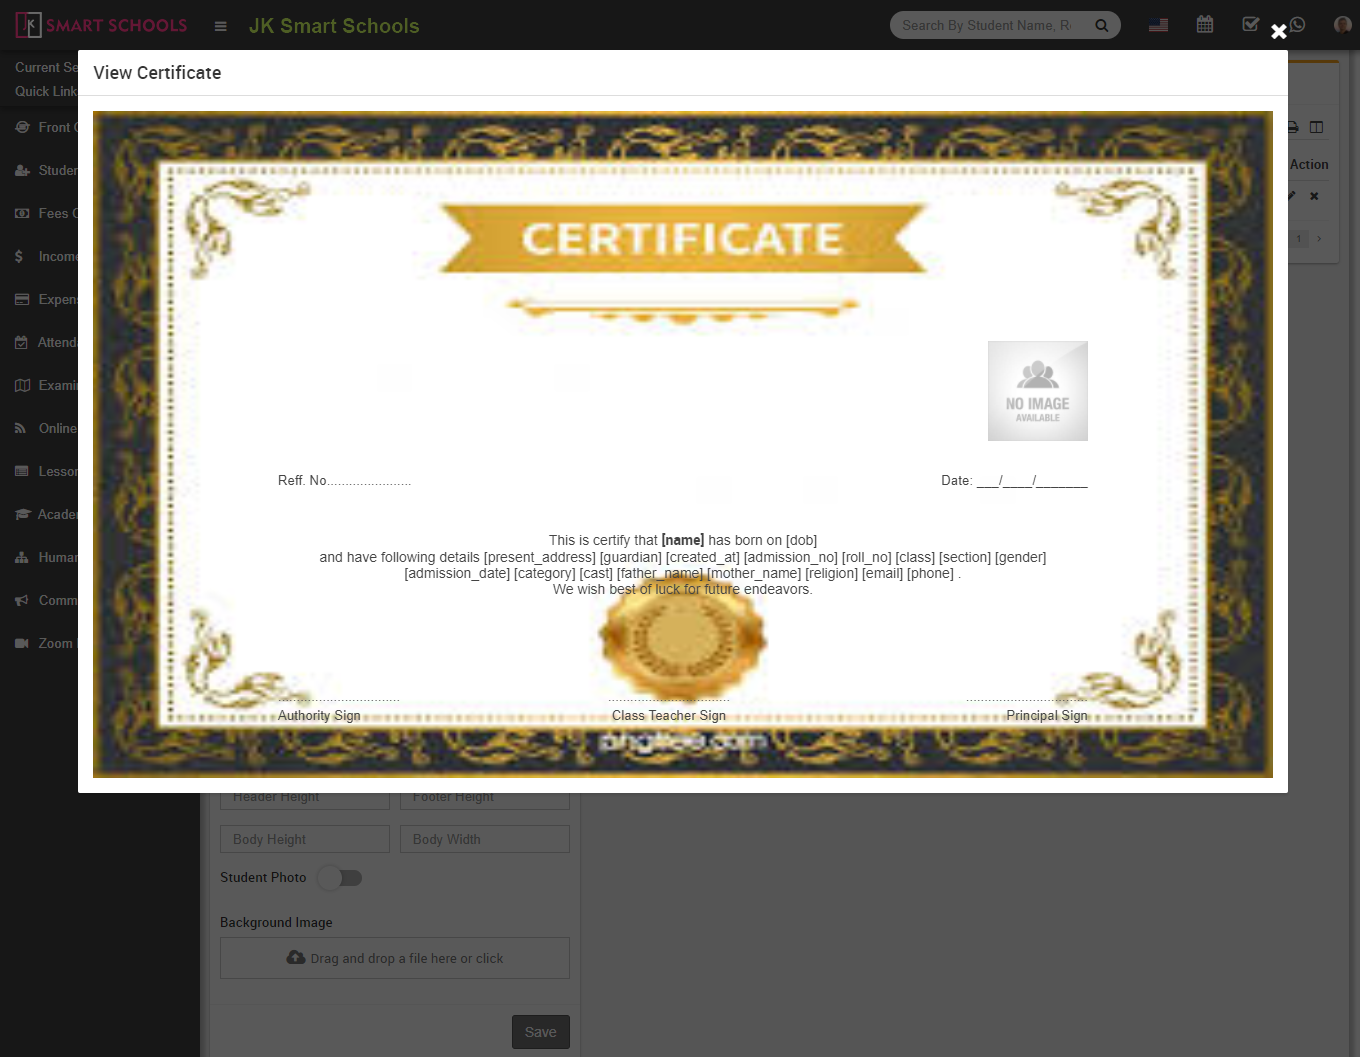 view student certificate image